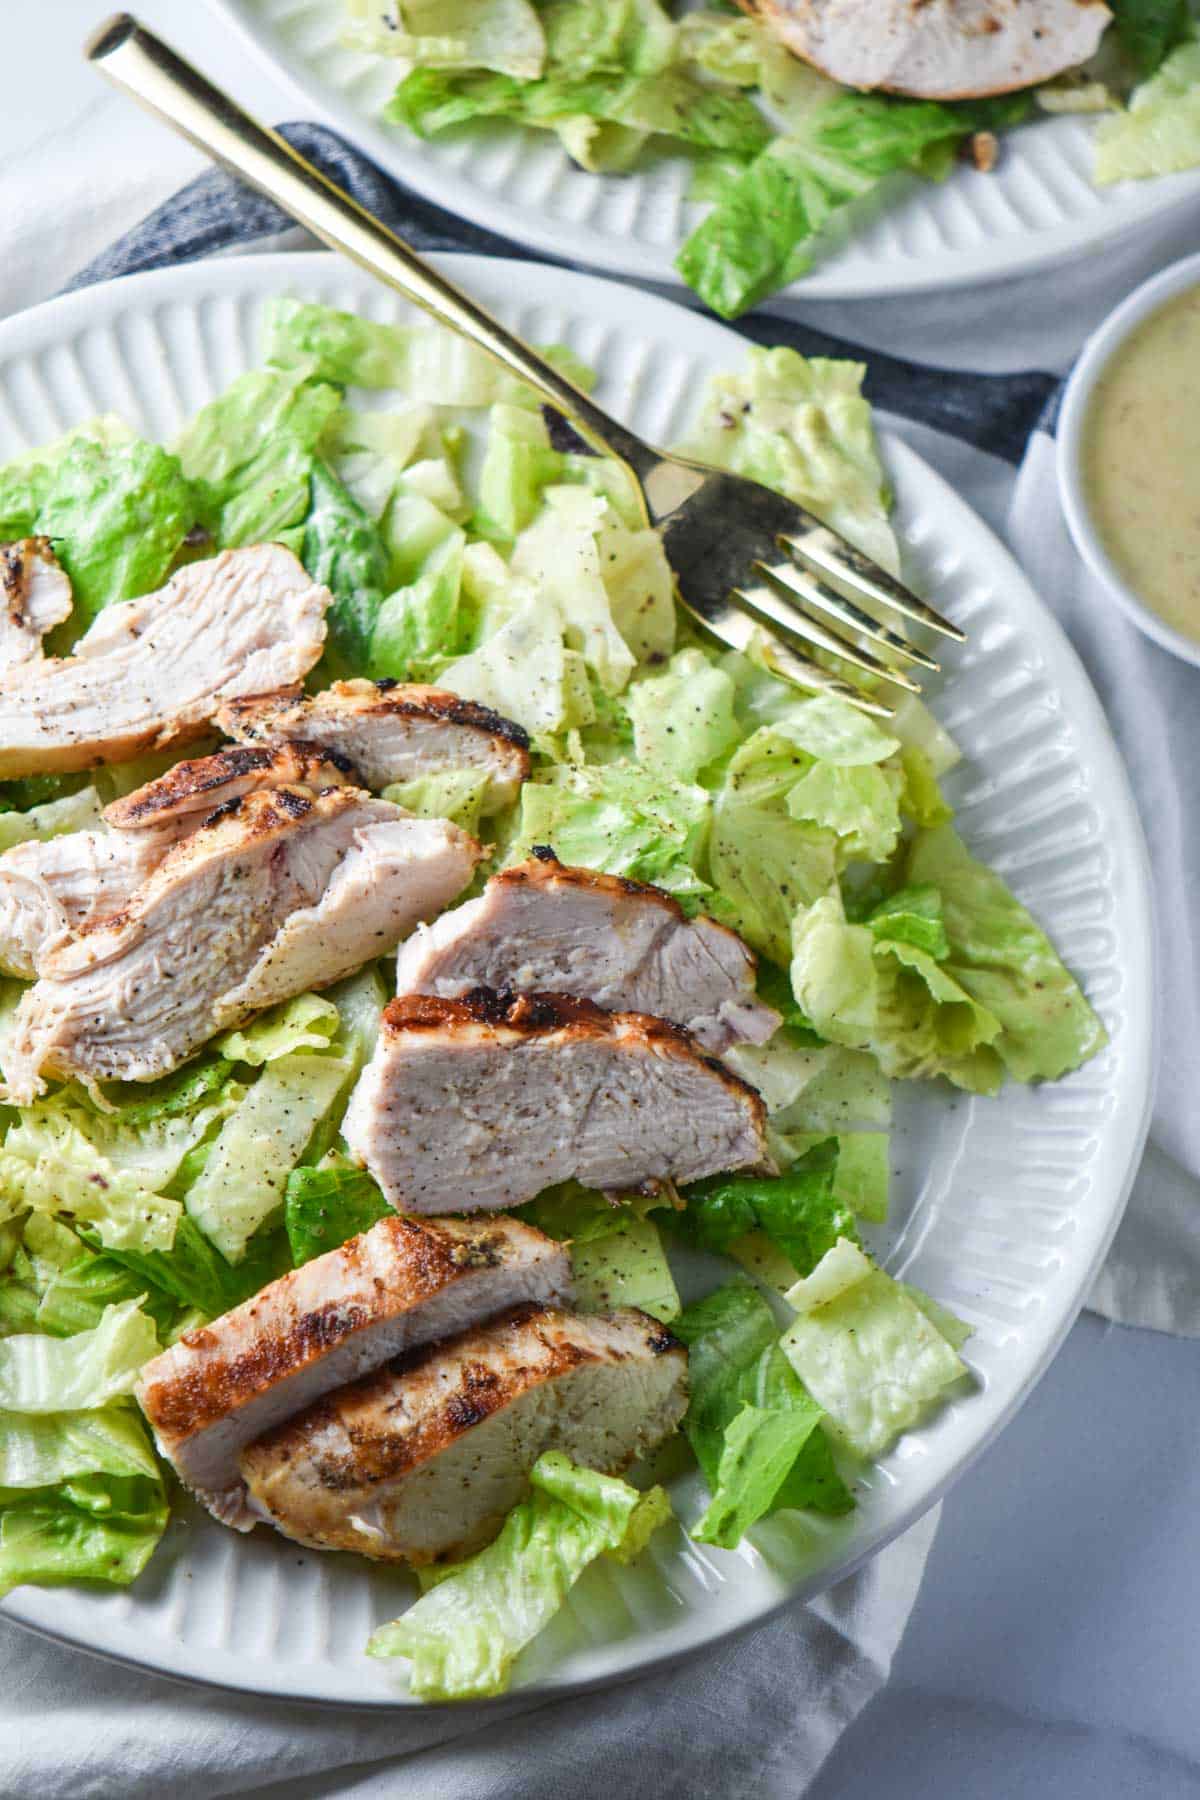 https://thedizzycook.com/wp-content/uploads/2023/08/Caesar-salad-without-anchovies-4.jpg